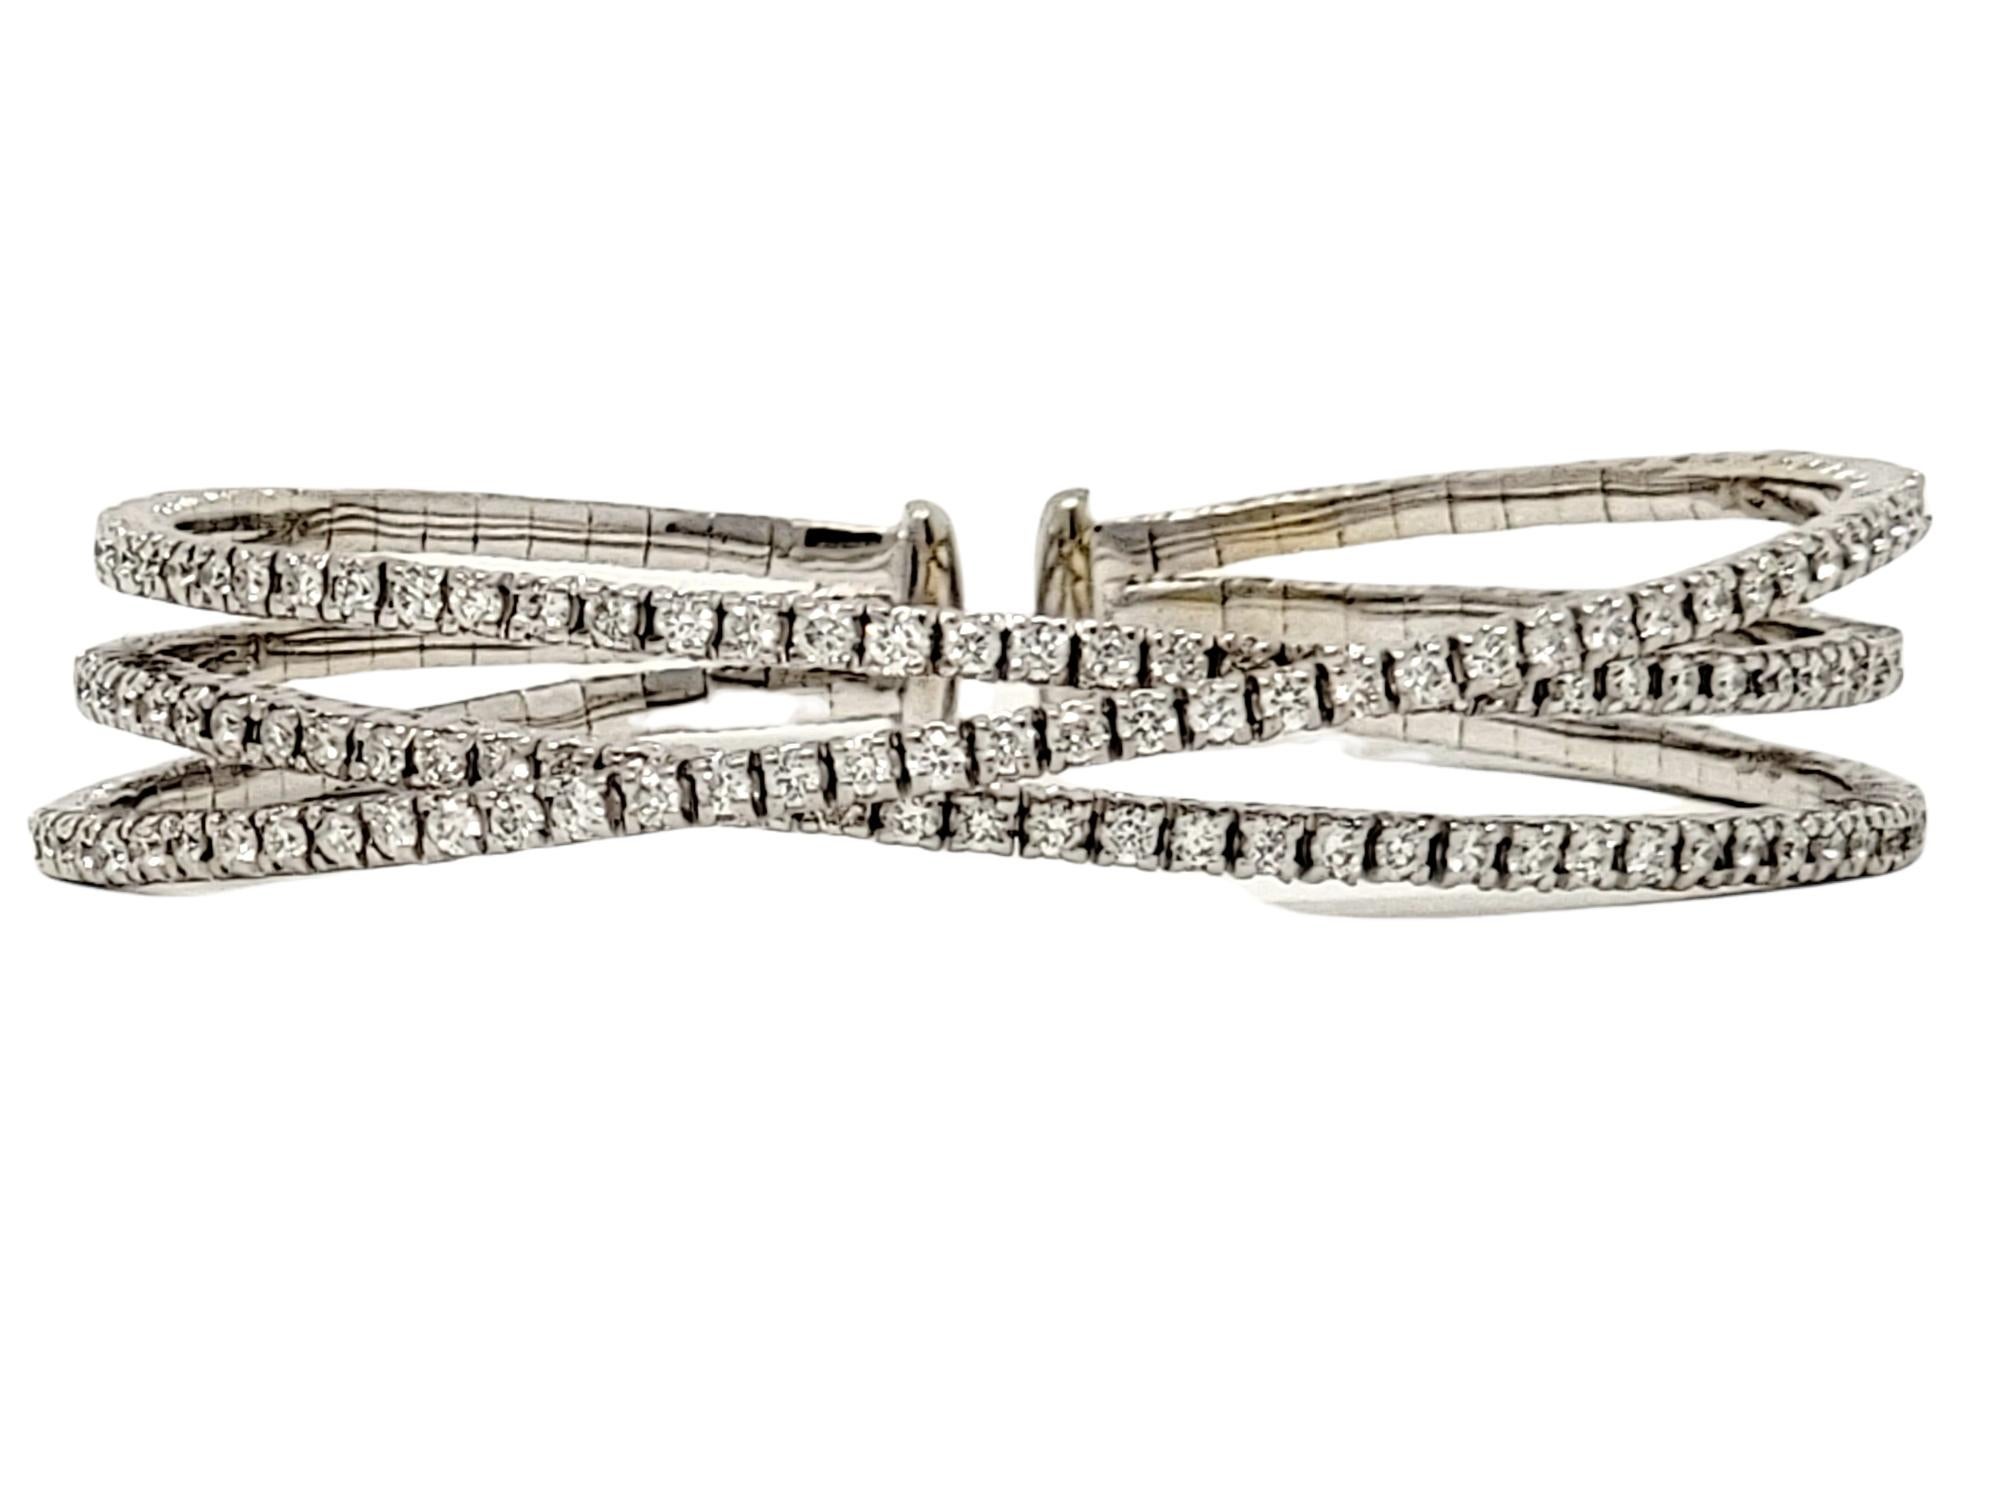 Breathtaking modern diamond cuff bracelet bursting with sparkle. This incredible bracelet is made of polished 18 karat white gold and features 3 individual rows set in an open crisscross design. The narrow rows are all embellished with glittering